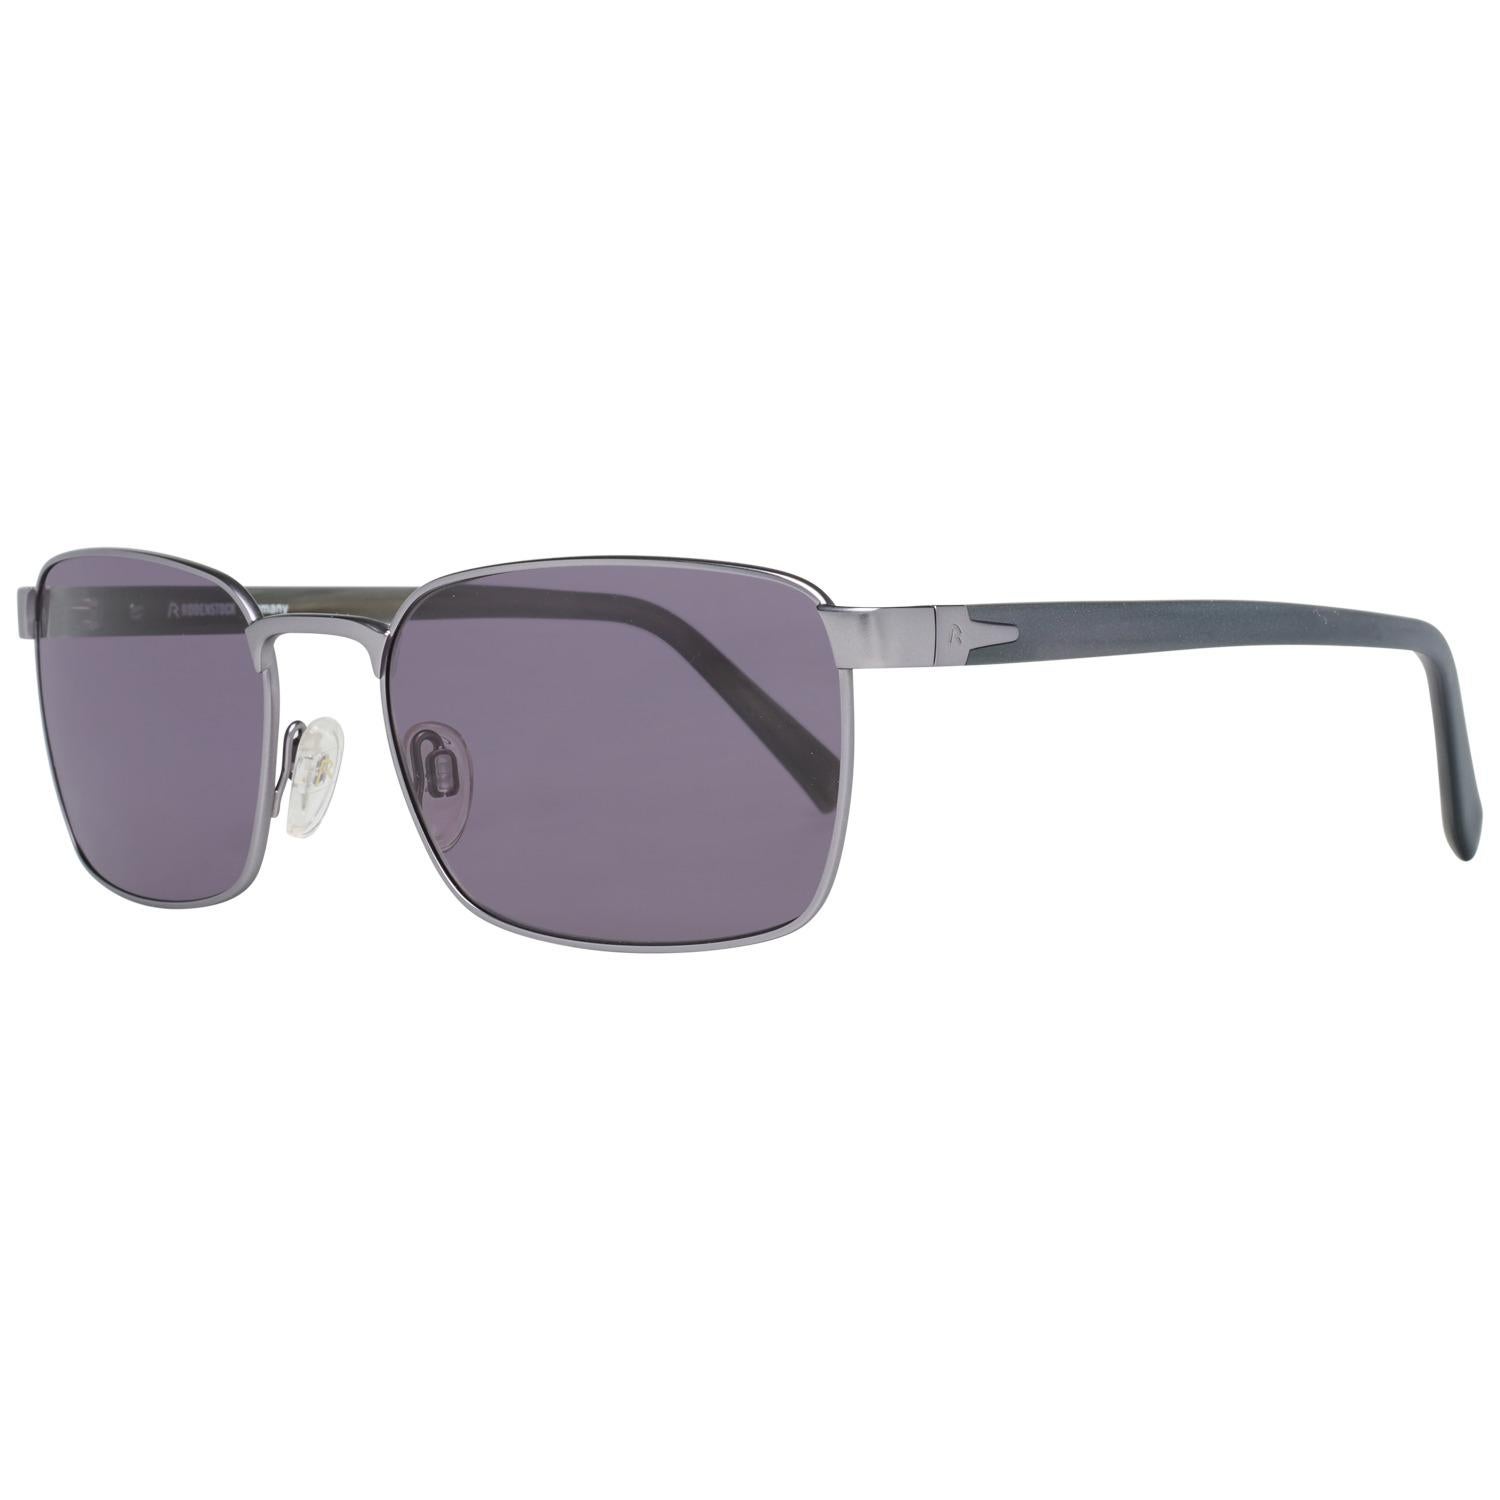 Details
MATERIAL: Metal
COLOR: Silver
MODEL: R1417 D 56
GENDER: Adult Unisex
COUNTRY OF MANUFACTURE: China
TYPE: Sunglasses
ORIGINAL CASE?: Yes
STYLE: Rectangle
OCCASION: Casual
FEATURES: Lightweight
LENS COLOR: Grey
LENS TECHNOLOGY: No Extra
YEAR